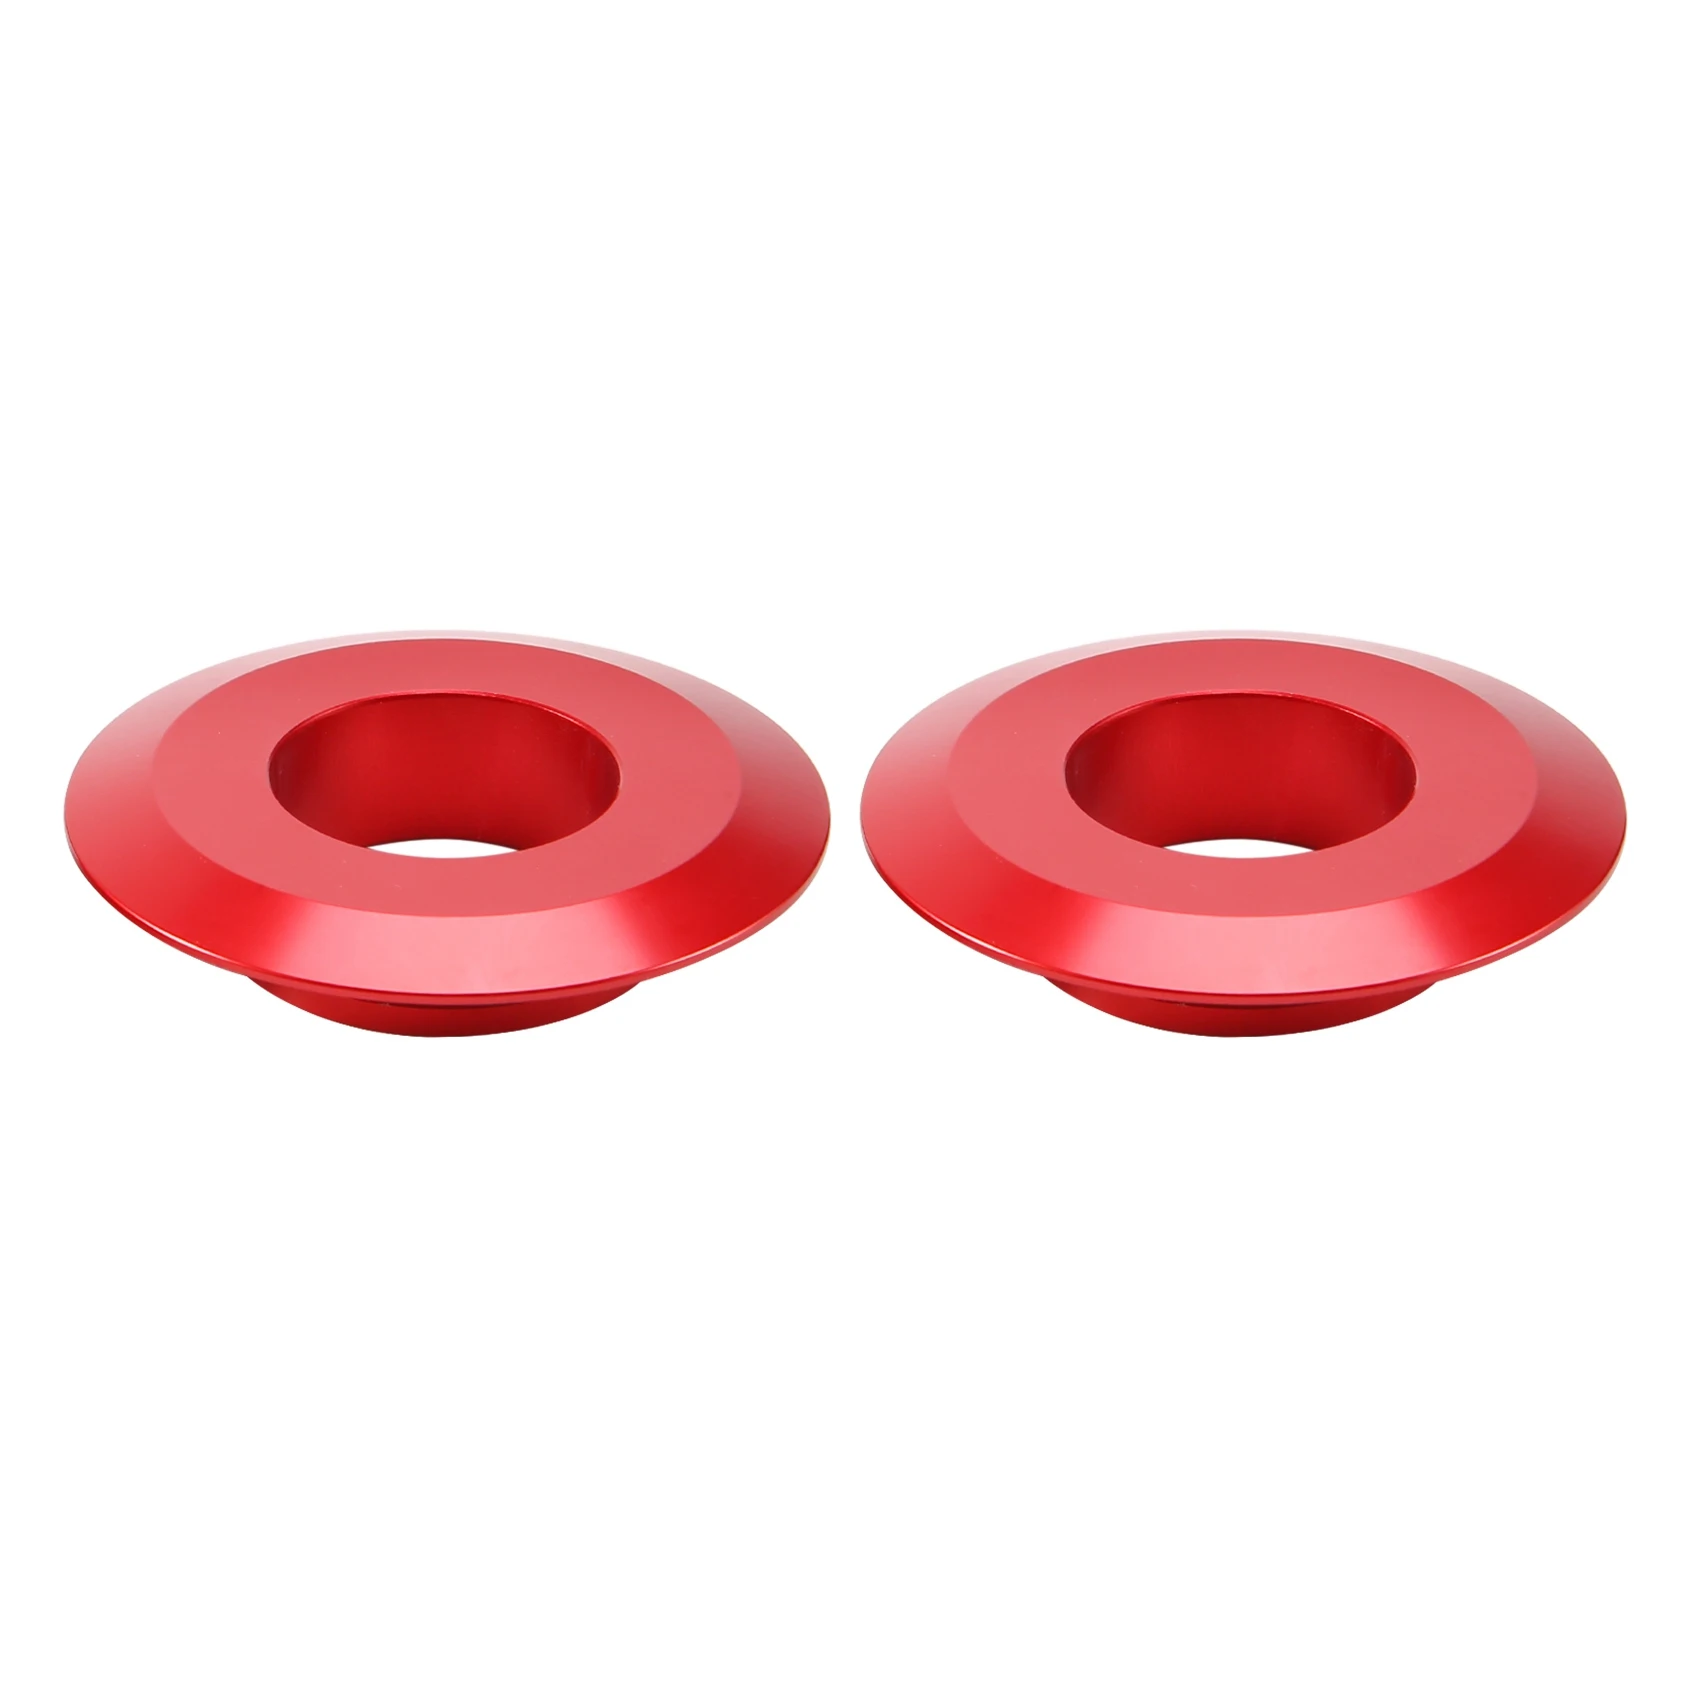 

Motorcycle Rear Wheel Hub Spacer for-BMW M1000RR M 1000 RR S1000R S1000RR S1000XR F900R F900XR(Red)